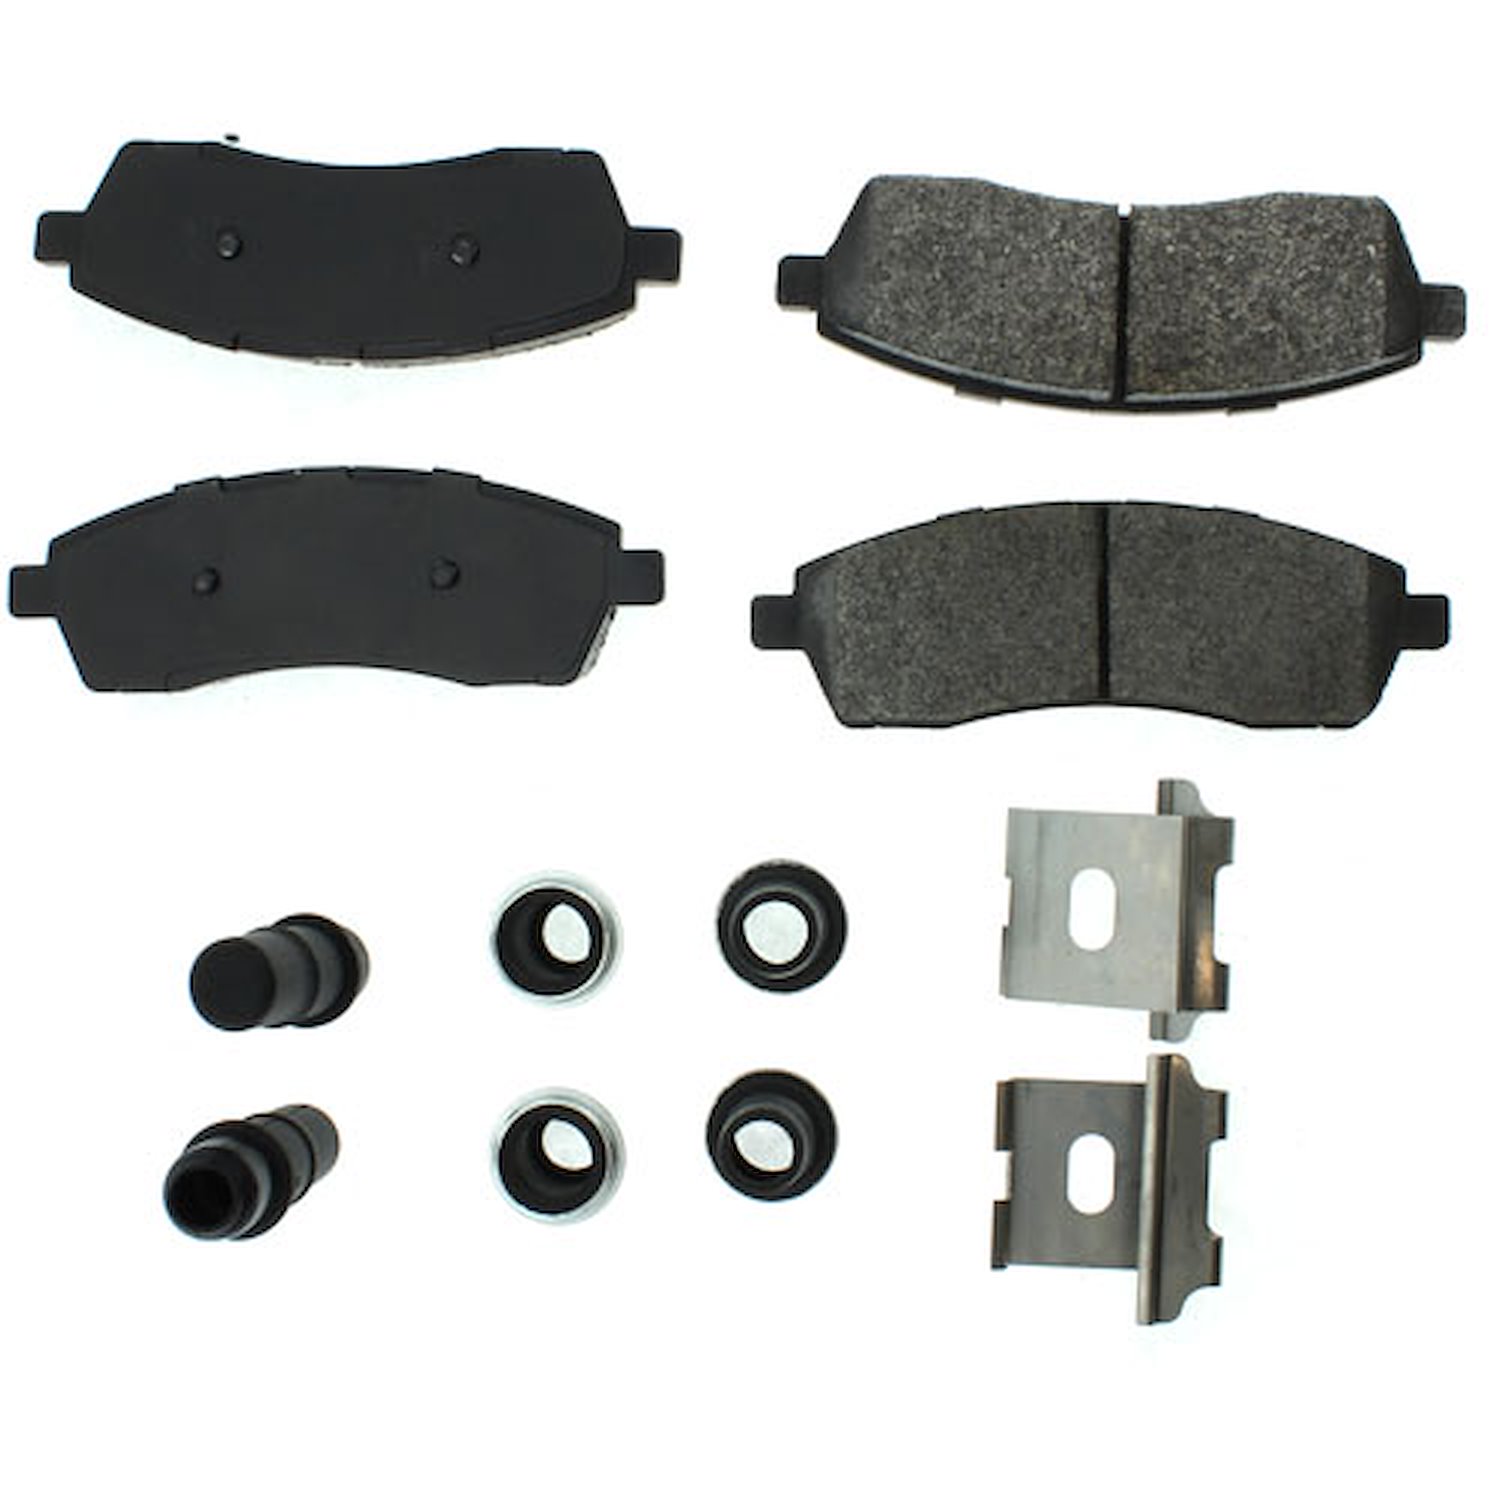 PosiQuiet Extended Wear 1999-2005 Ford Excursion F-250 Super Duty F-350 Super Duty